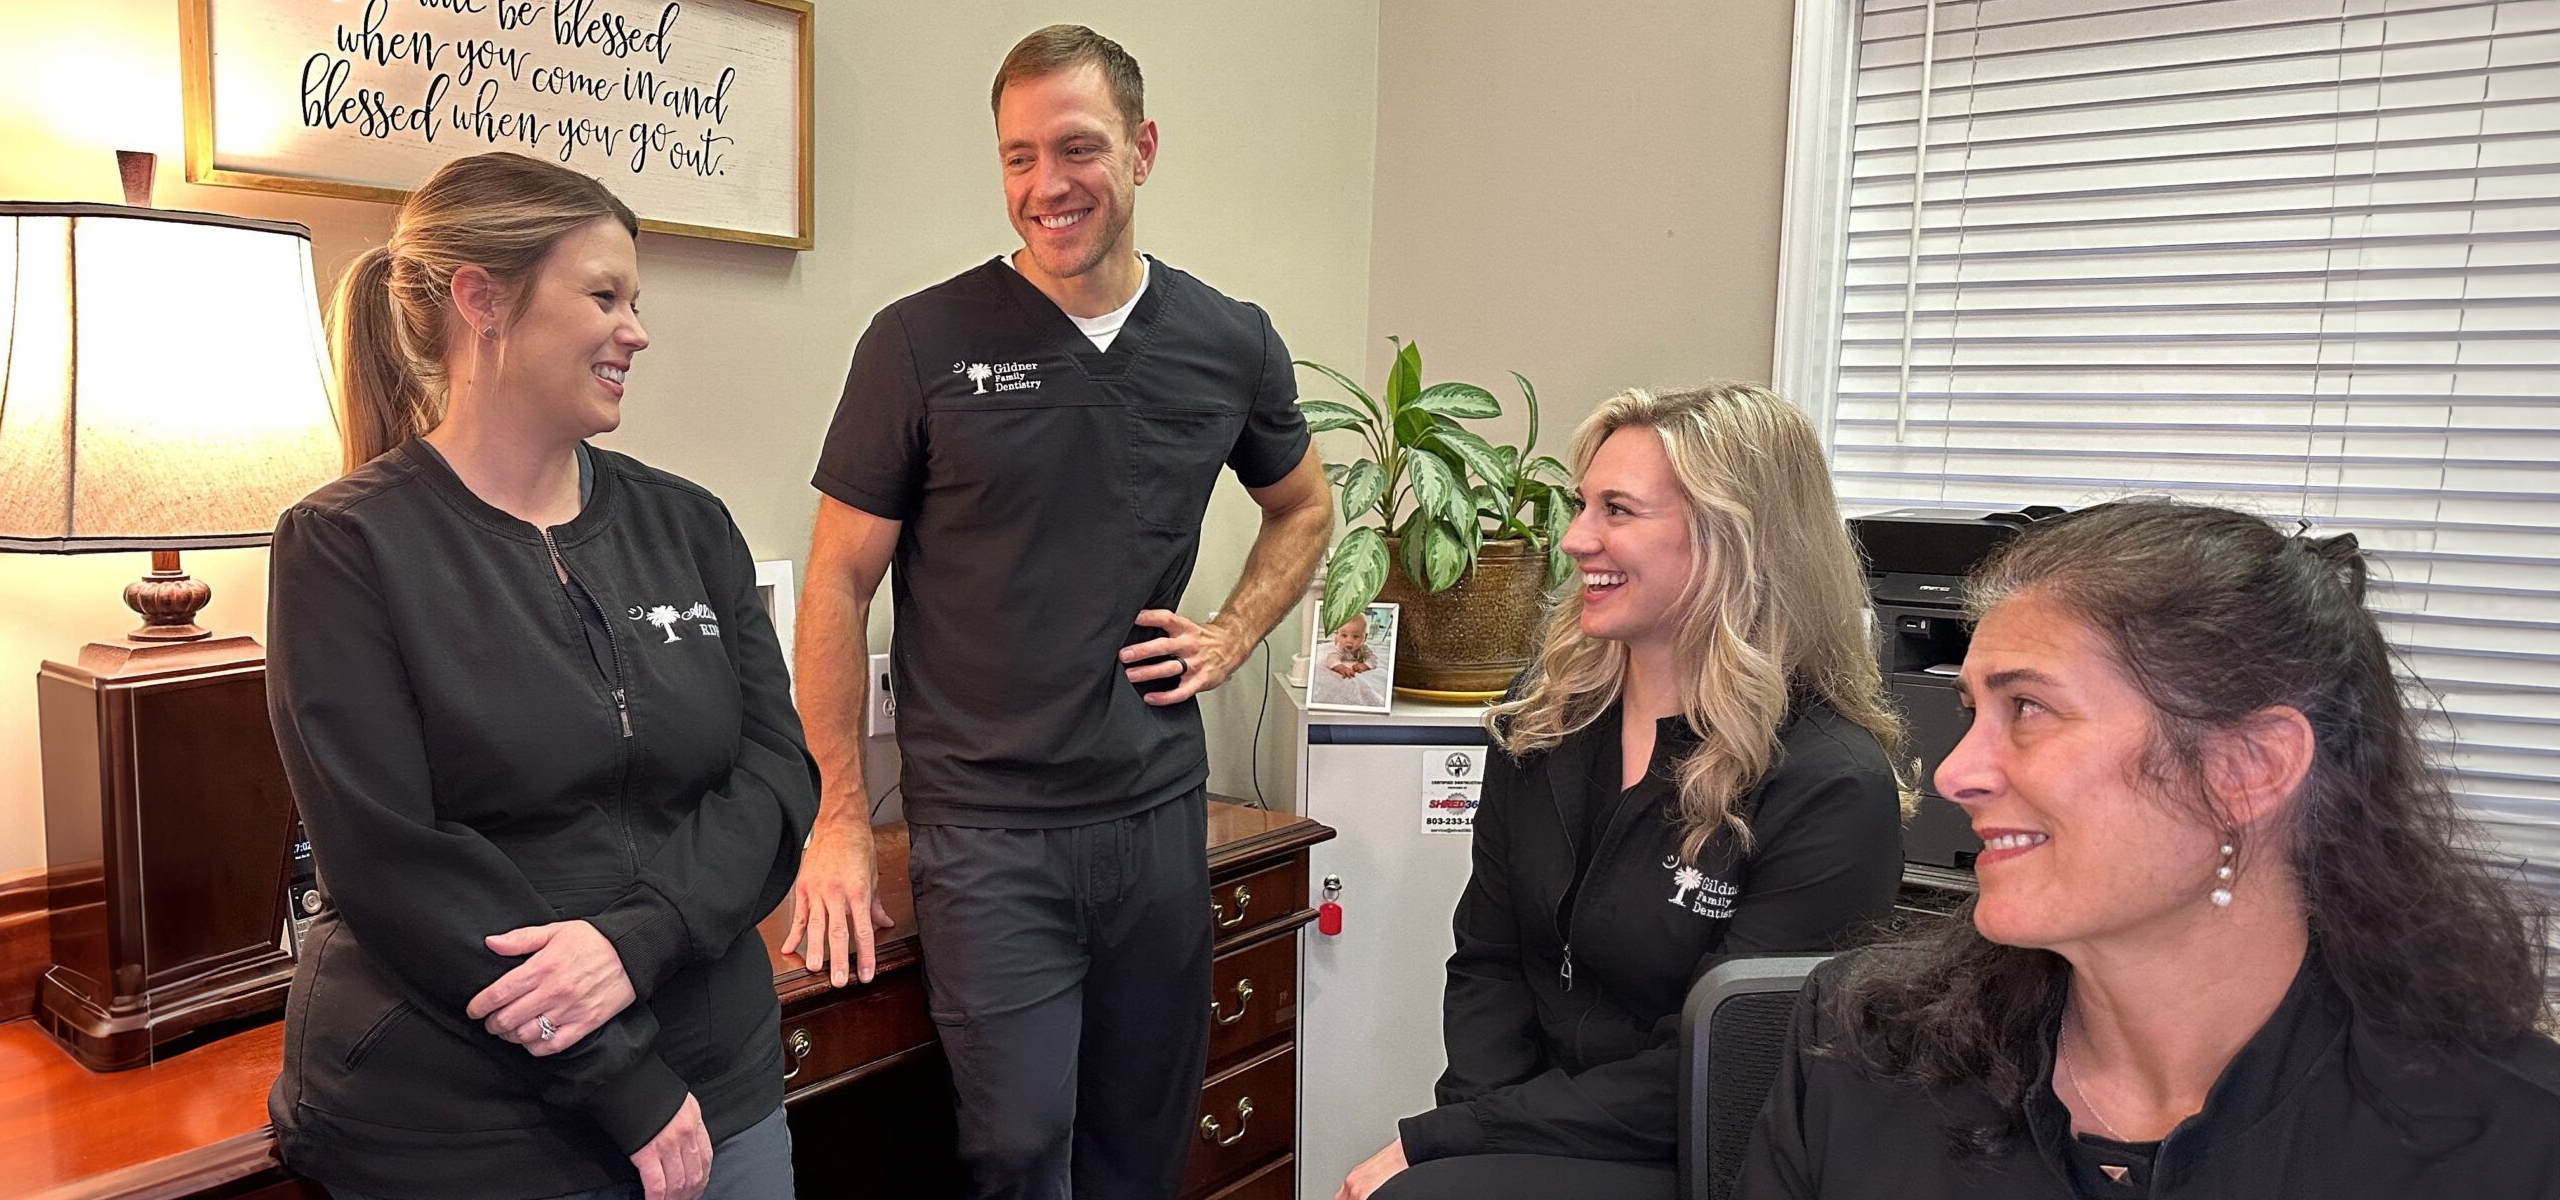 The dental team of Gildner Family Dentistry sitting together and laughing at Gildner Family Dentistry in Lexington, SC